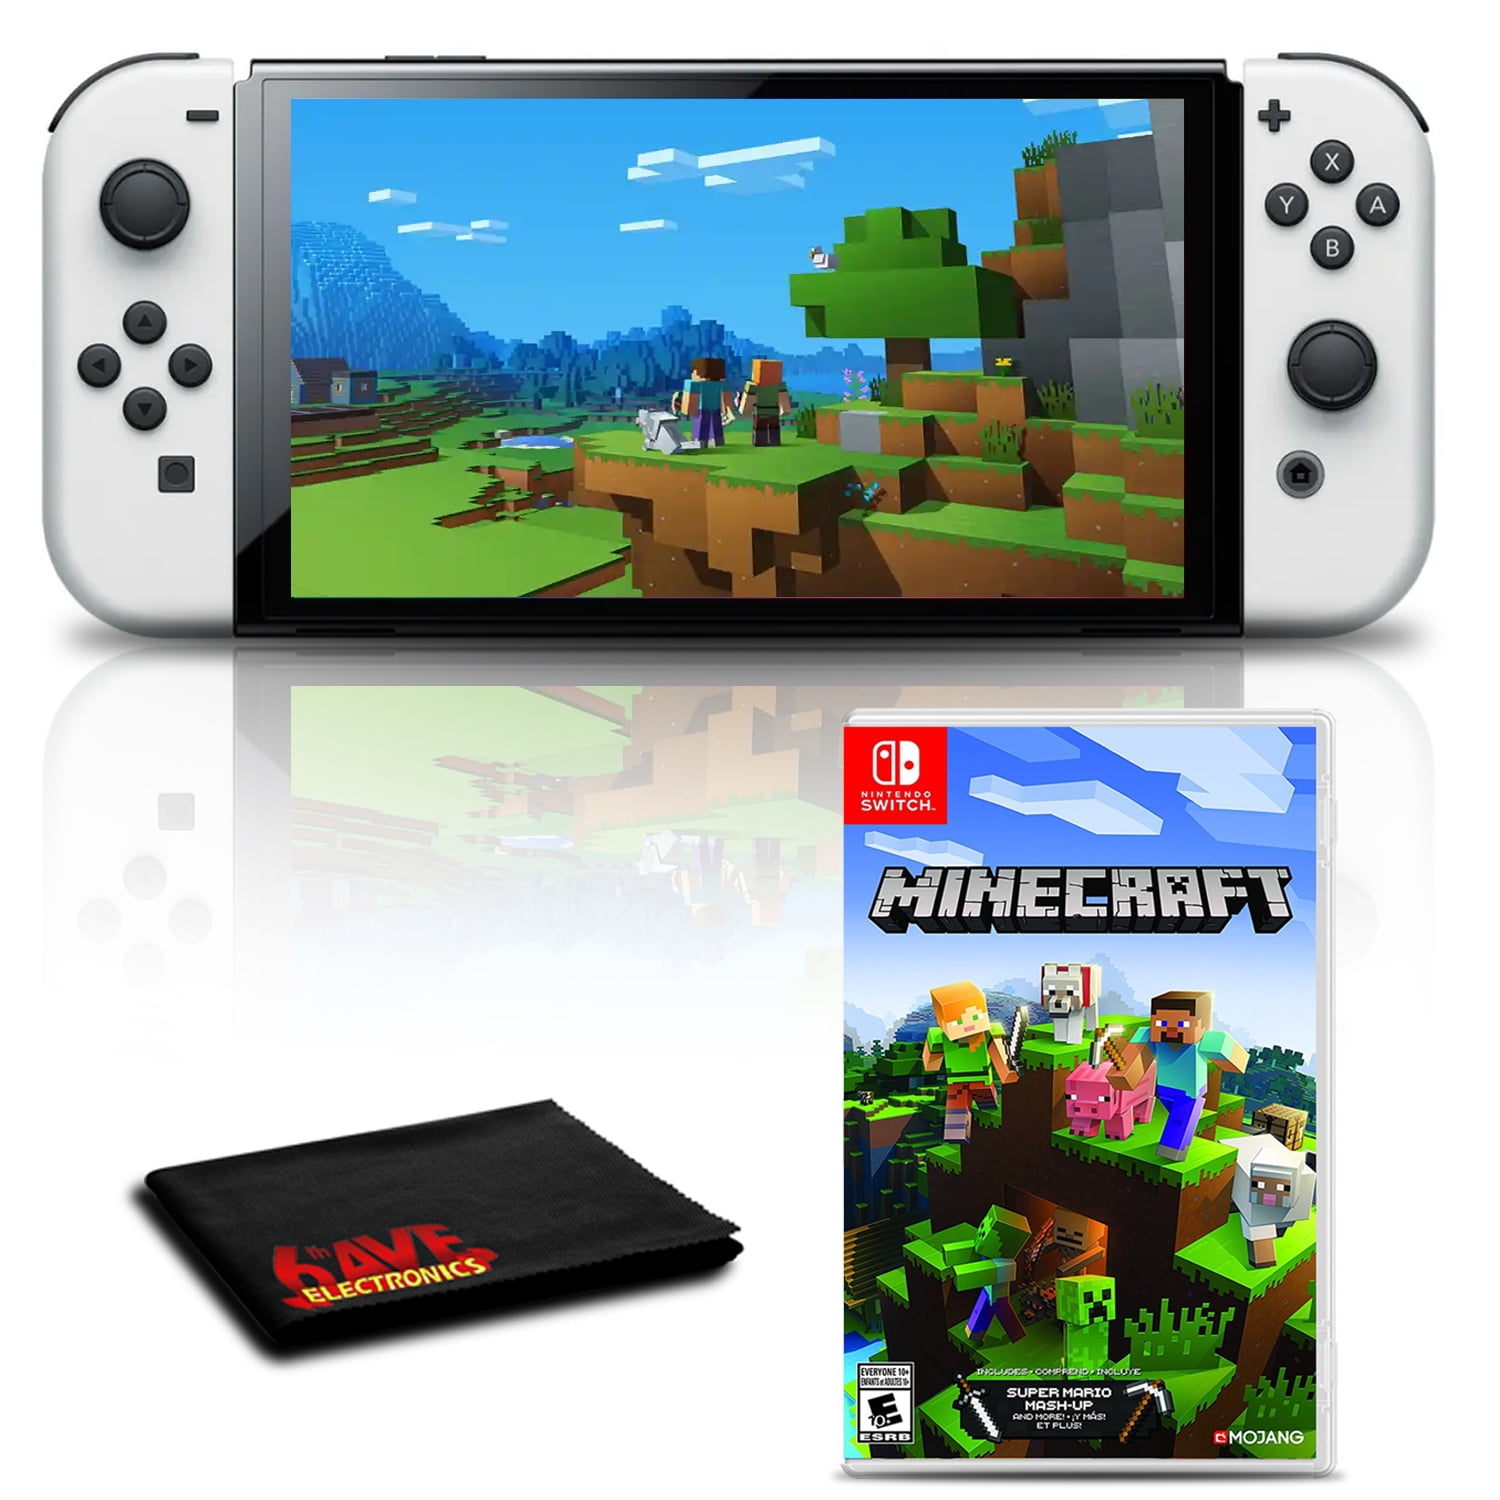 Interpret: 40% of Nintendo Switch owners are Minecraft fans